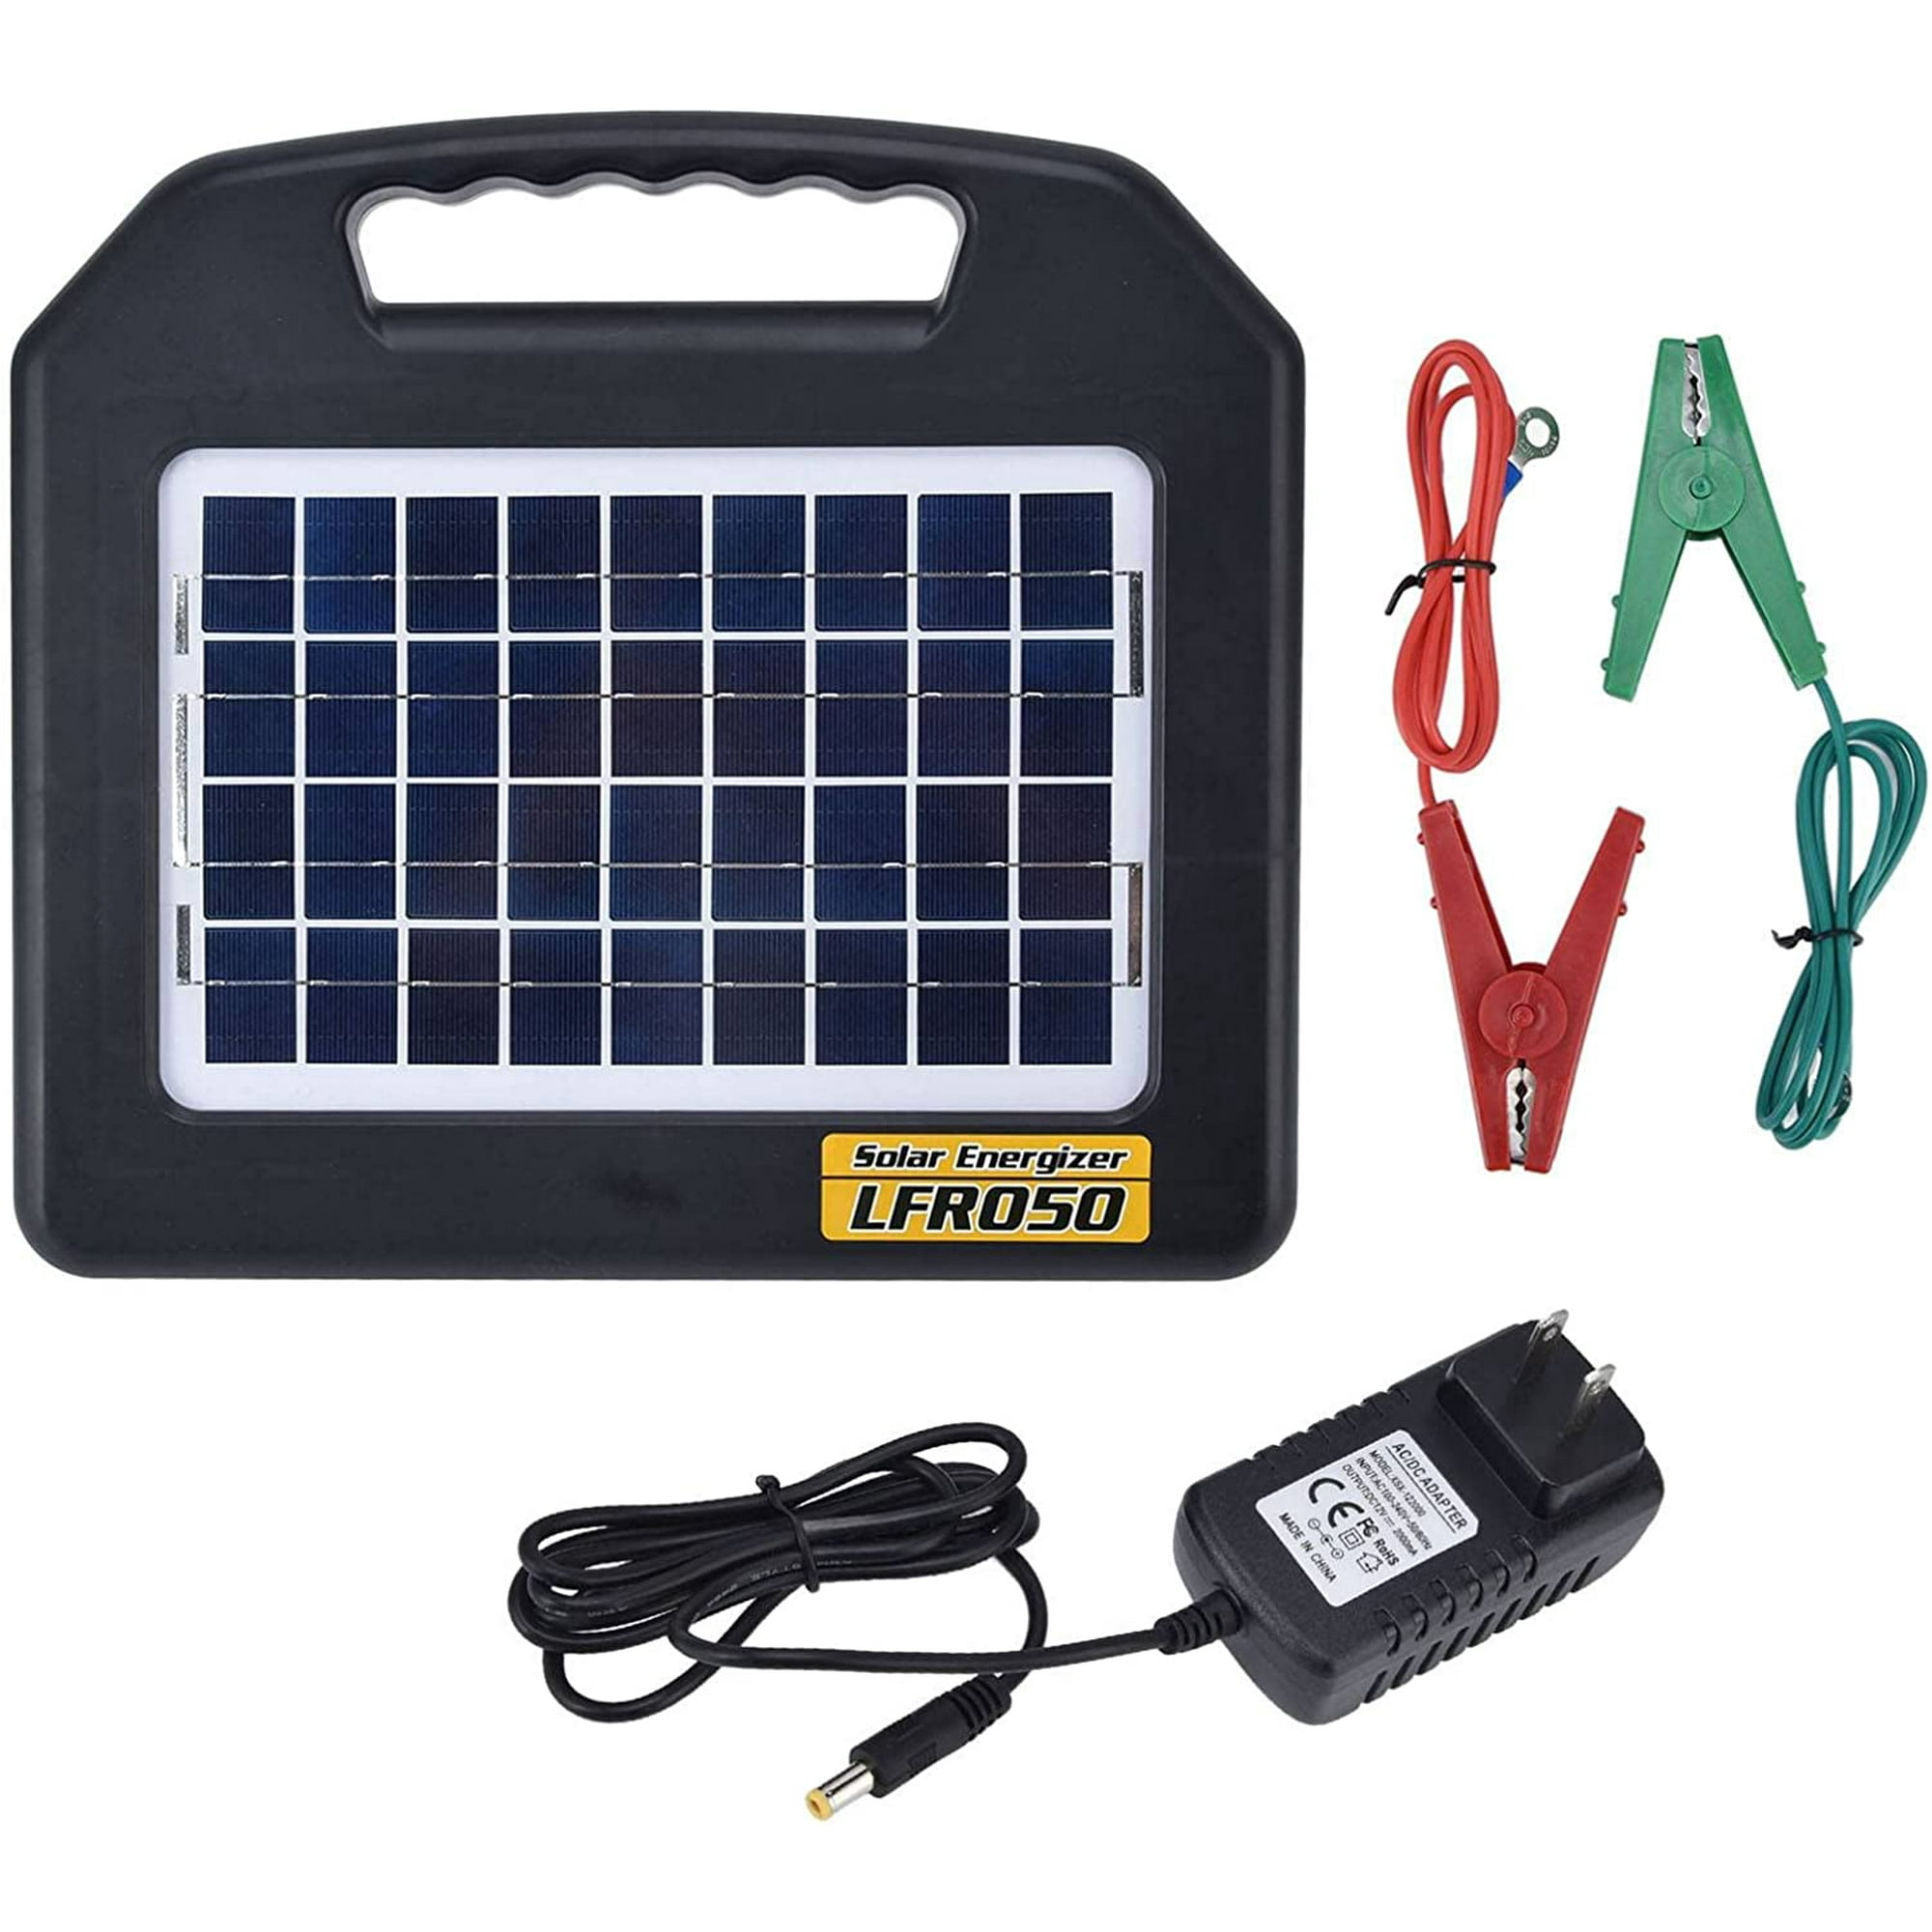 20 Miles Range Electric Fence Energizer Solar Powered Fence Charger for  Livestock, Horses, Cattle, Sheep, Goats, Pet(#1) | Walmart Canada